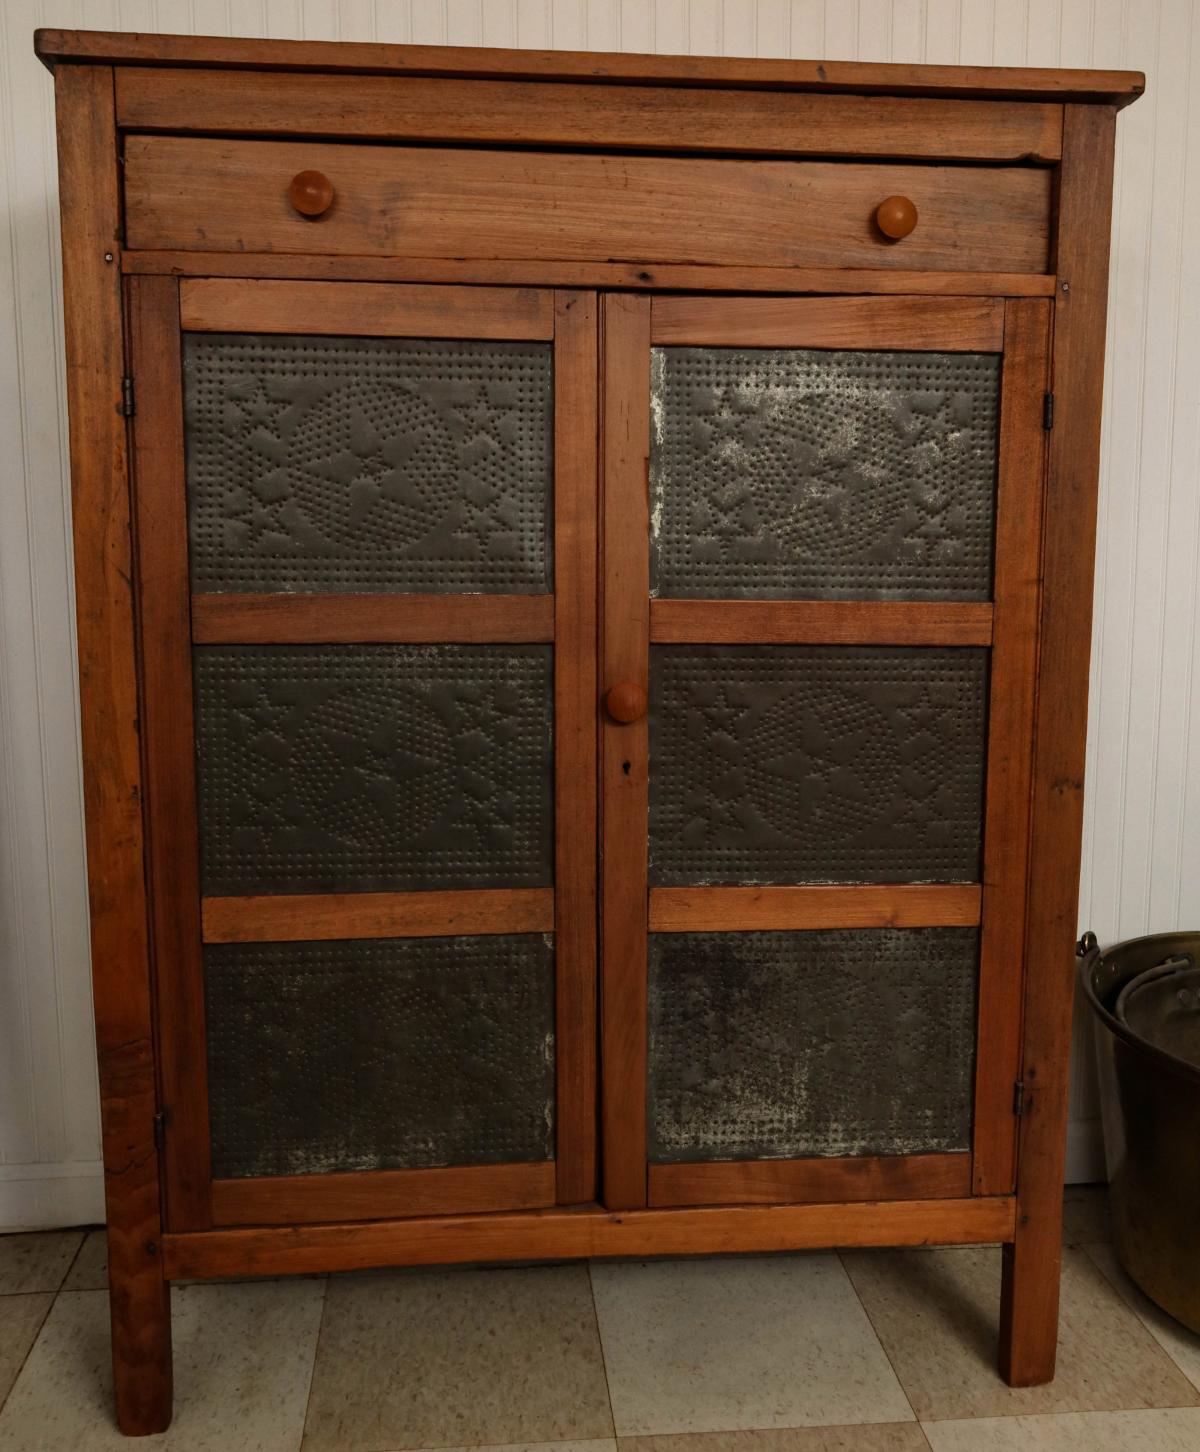 AN EARLY 20TH C. PIE SAFE WITH SIX STAR PUNCH TINS